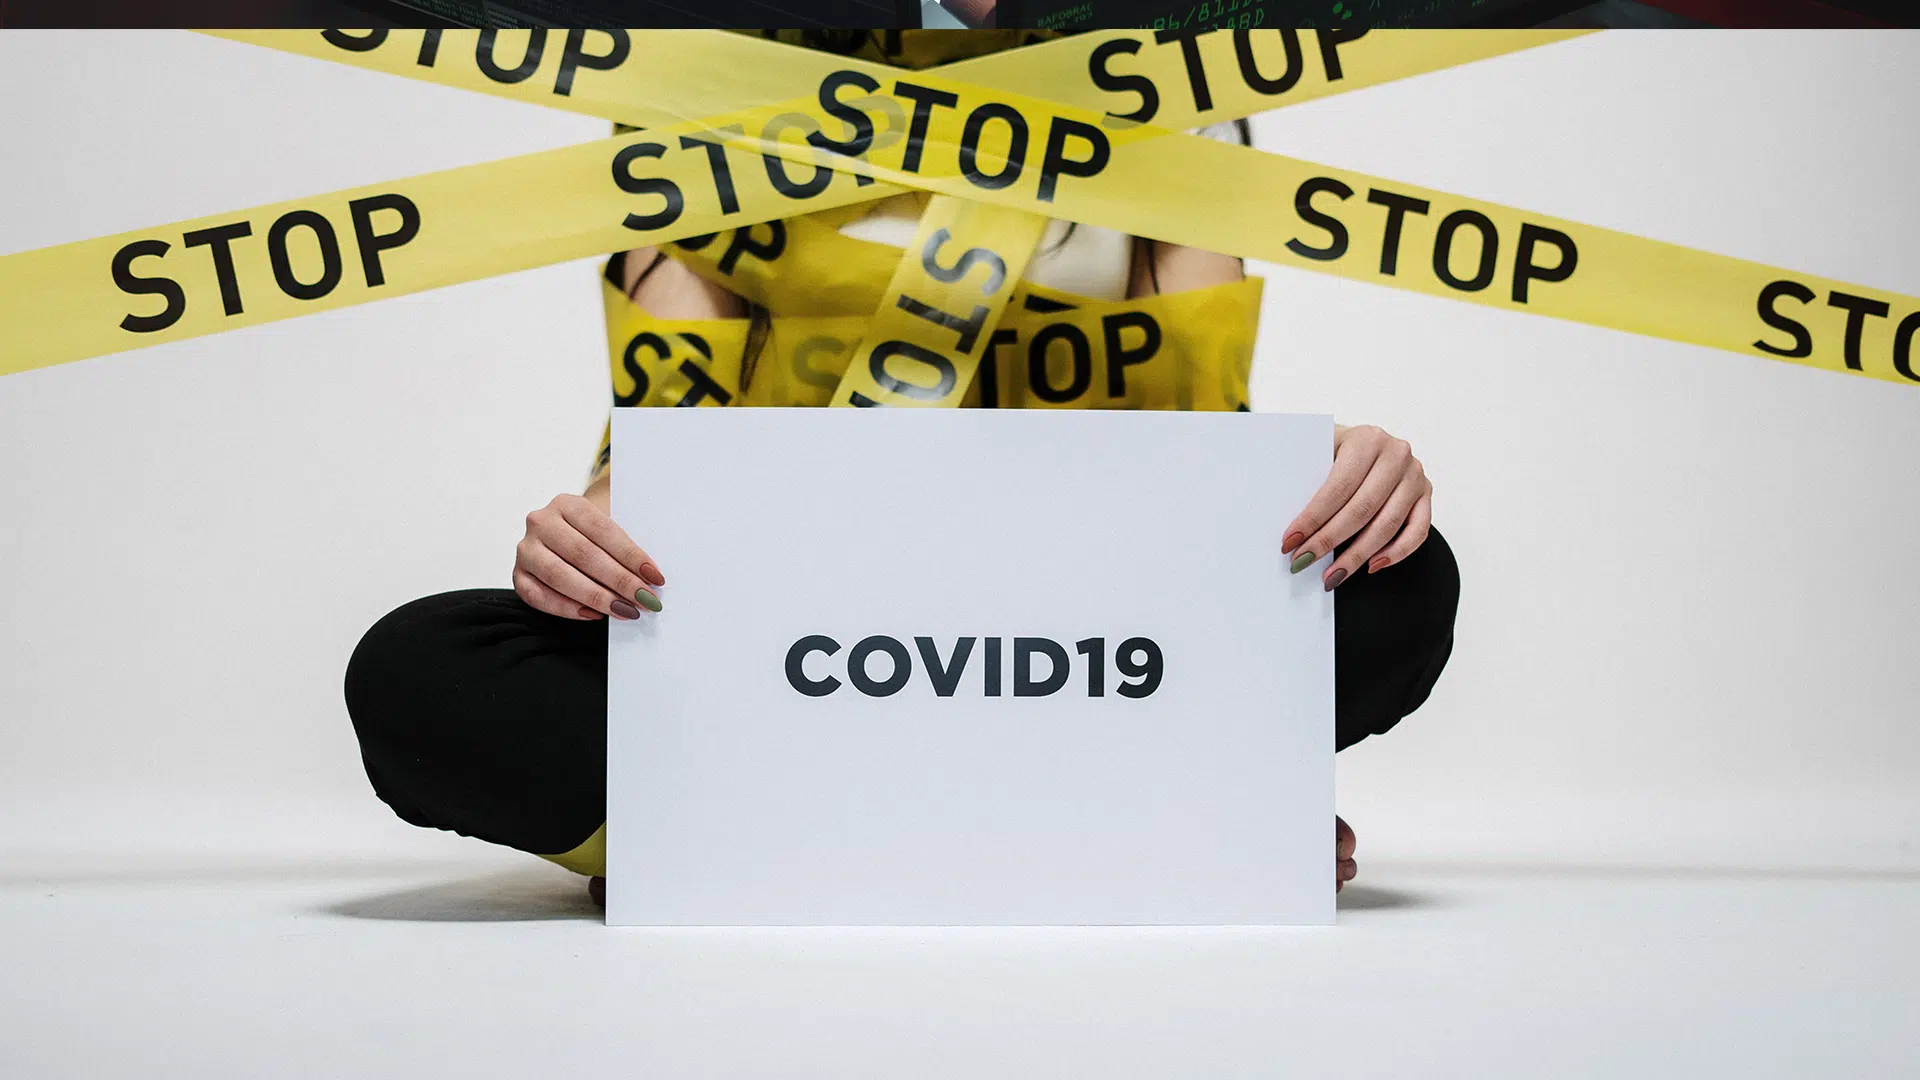 COVID-19 resources and news